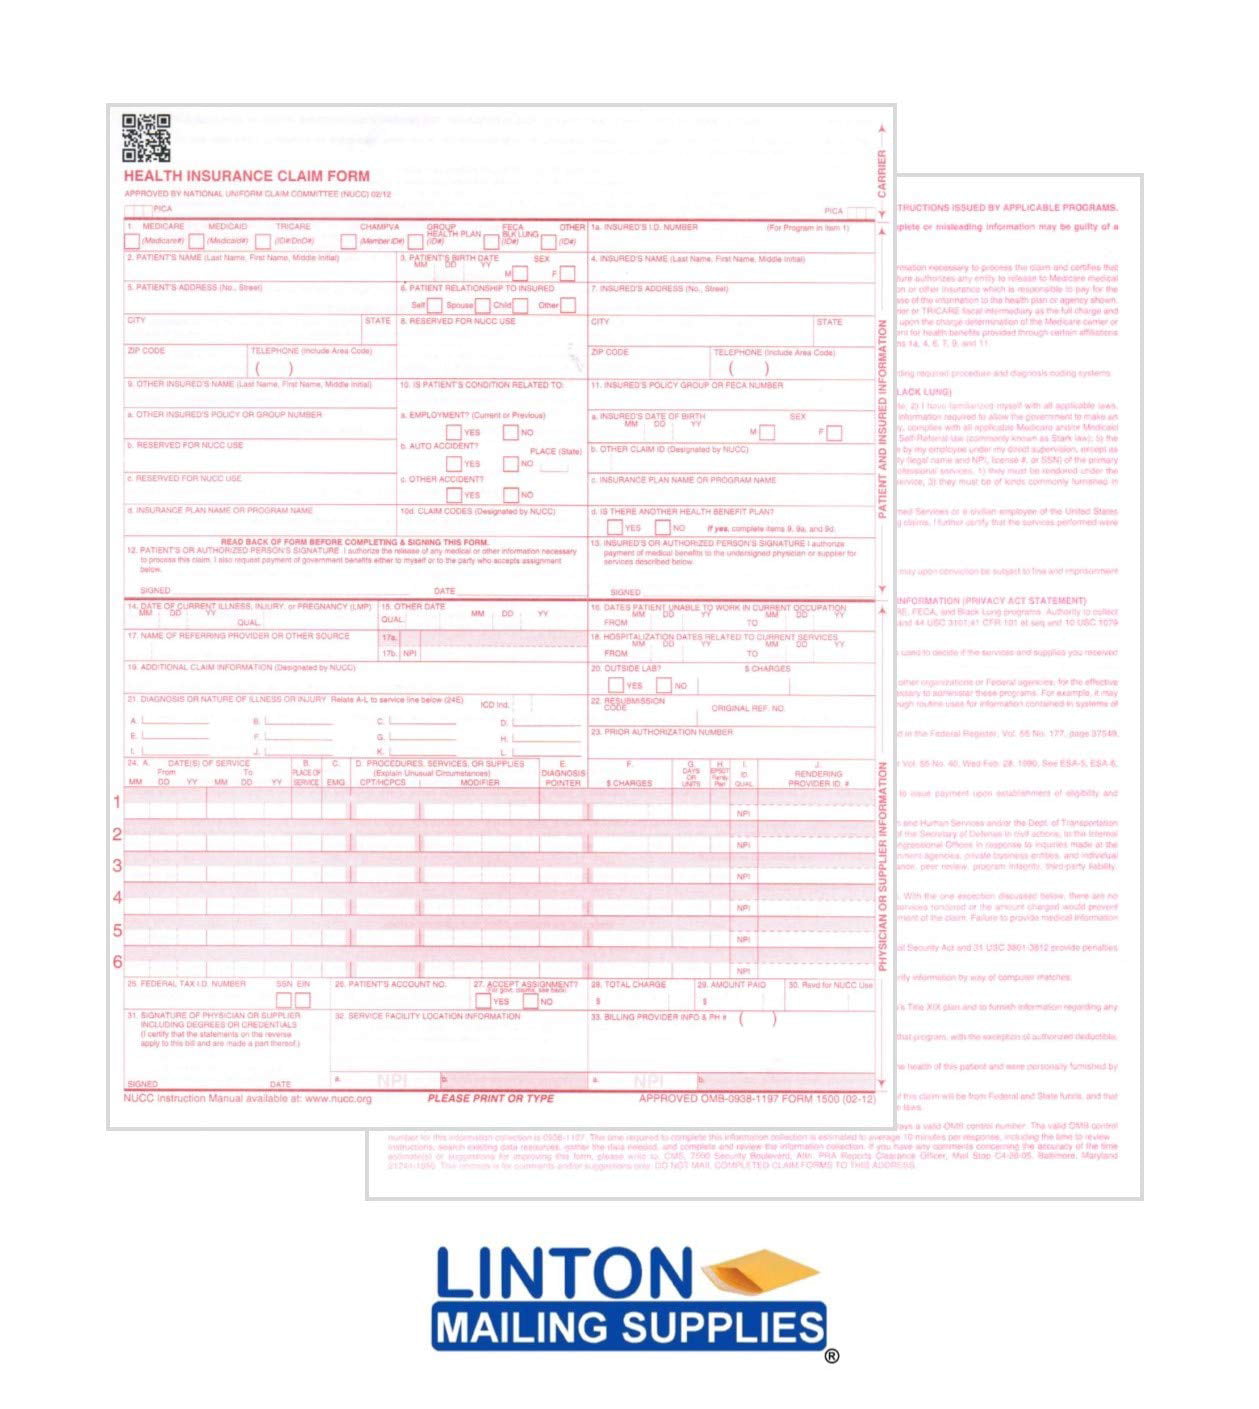 2500 Sheets NEW CMS 1500 Claim Forms Version 02/12 HCFA 